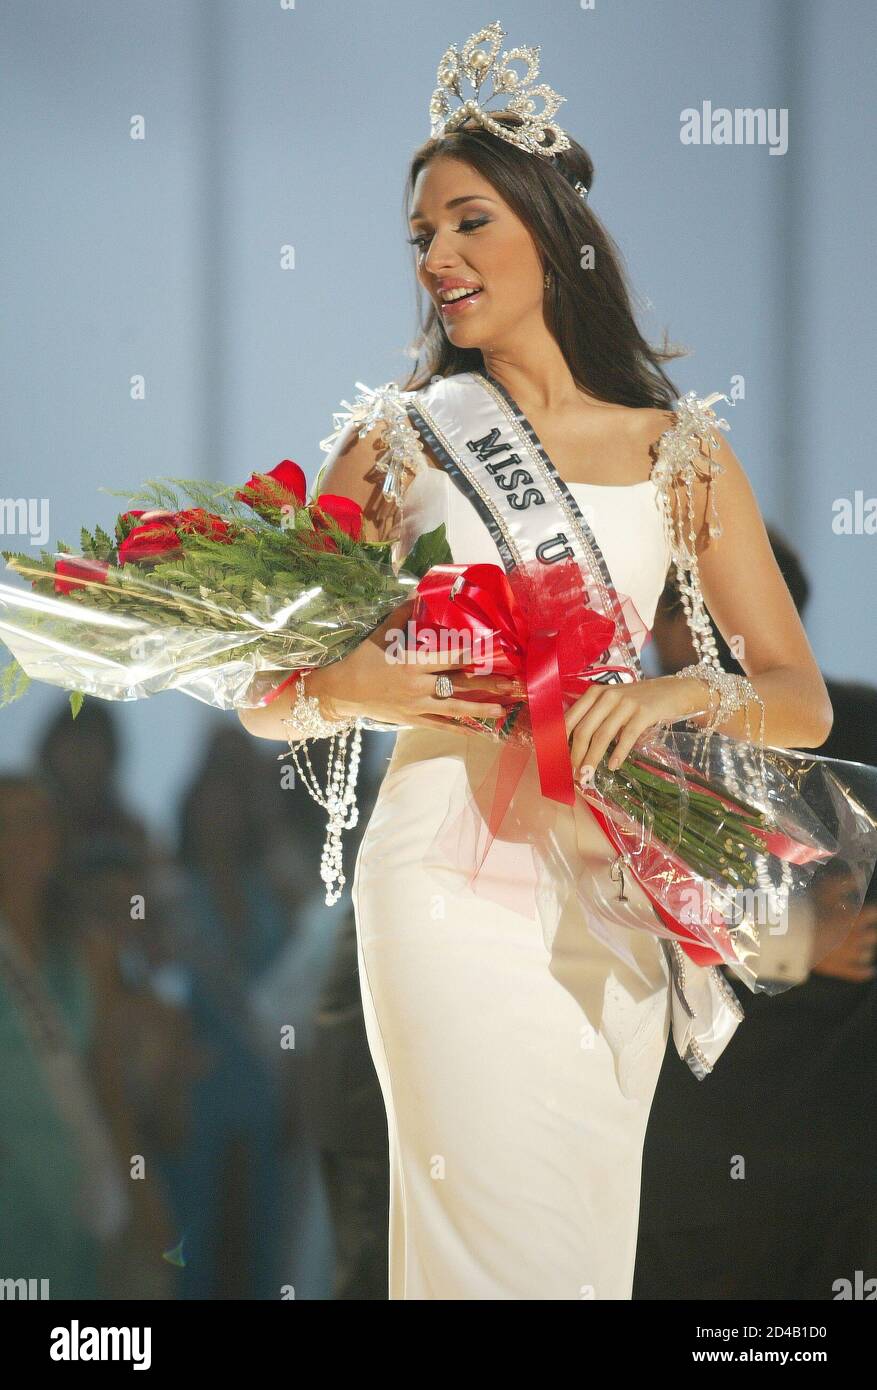 Miss Dominican Republic Amelia Vega walks with her bouquet after being  crowned Miss Universe during the 2003 Miss Universe Pageant in Panama City  June 3, 2003. Vega, an 18-year-old high school student,